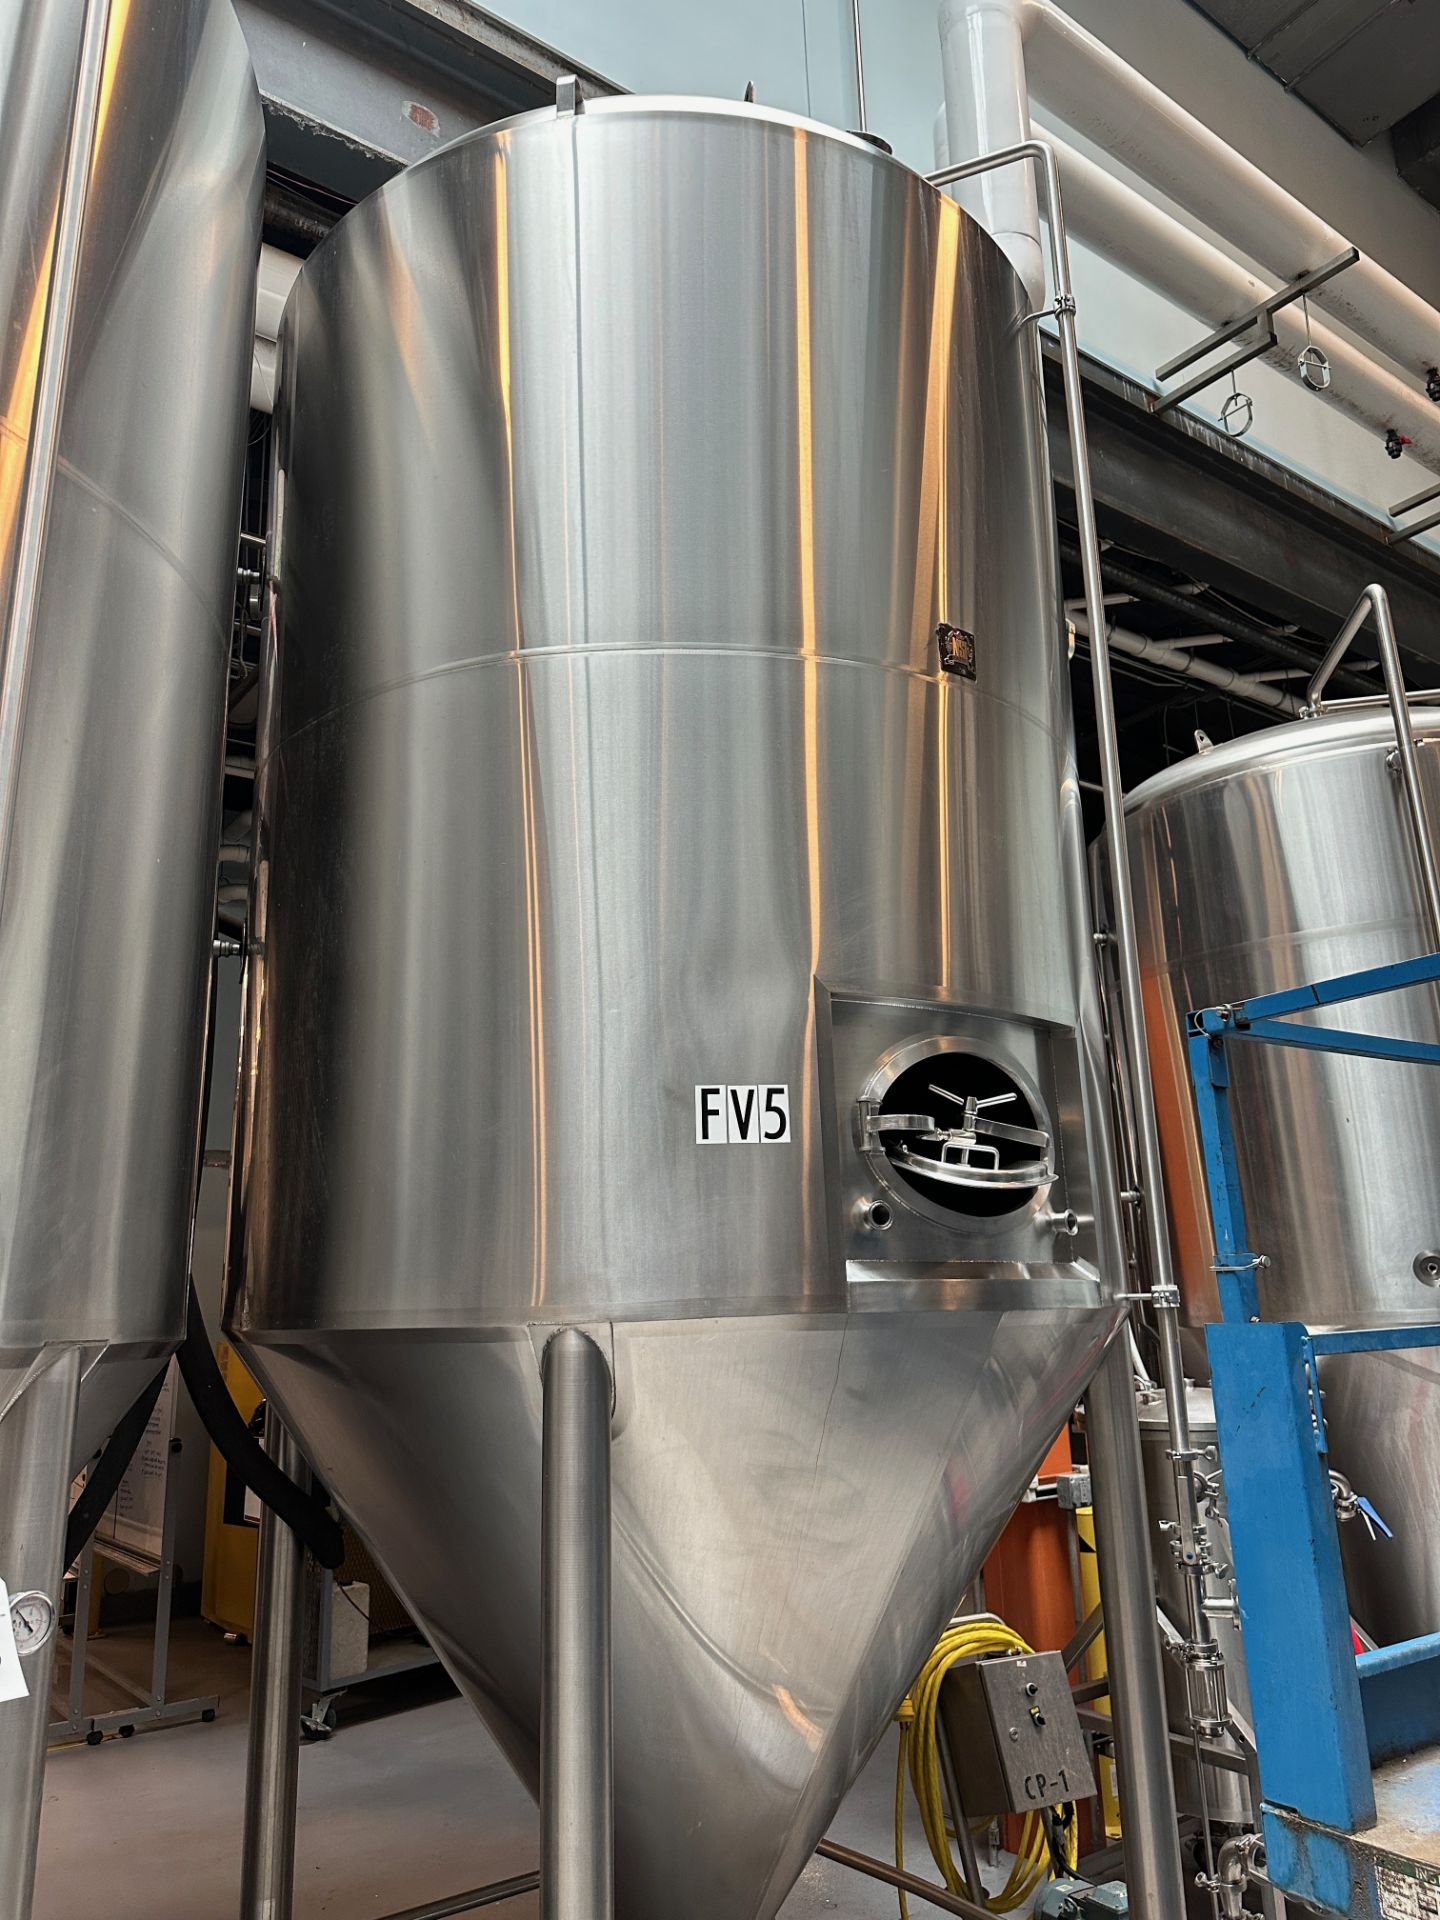 Complete 40 BBL Microbrewery - 40 BBL Deutsche 4-Vessel Brewhouse, Tanks, Can Line - See Description - Image 38 of 335